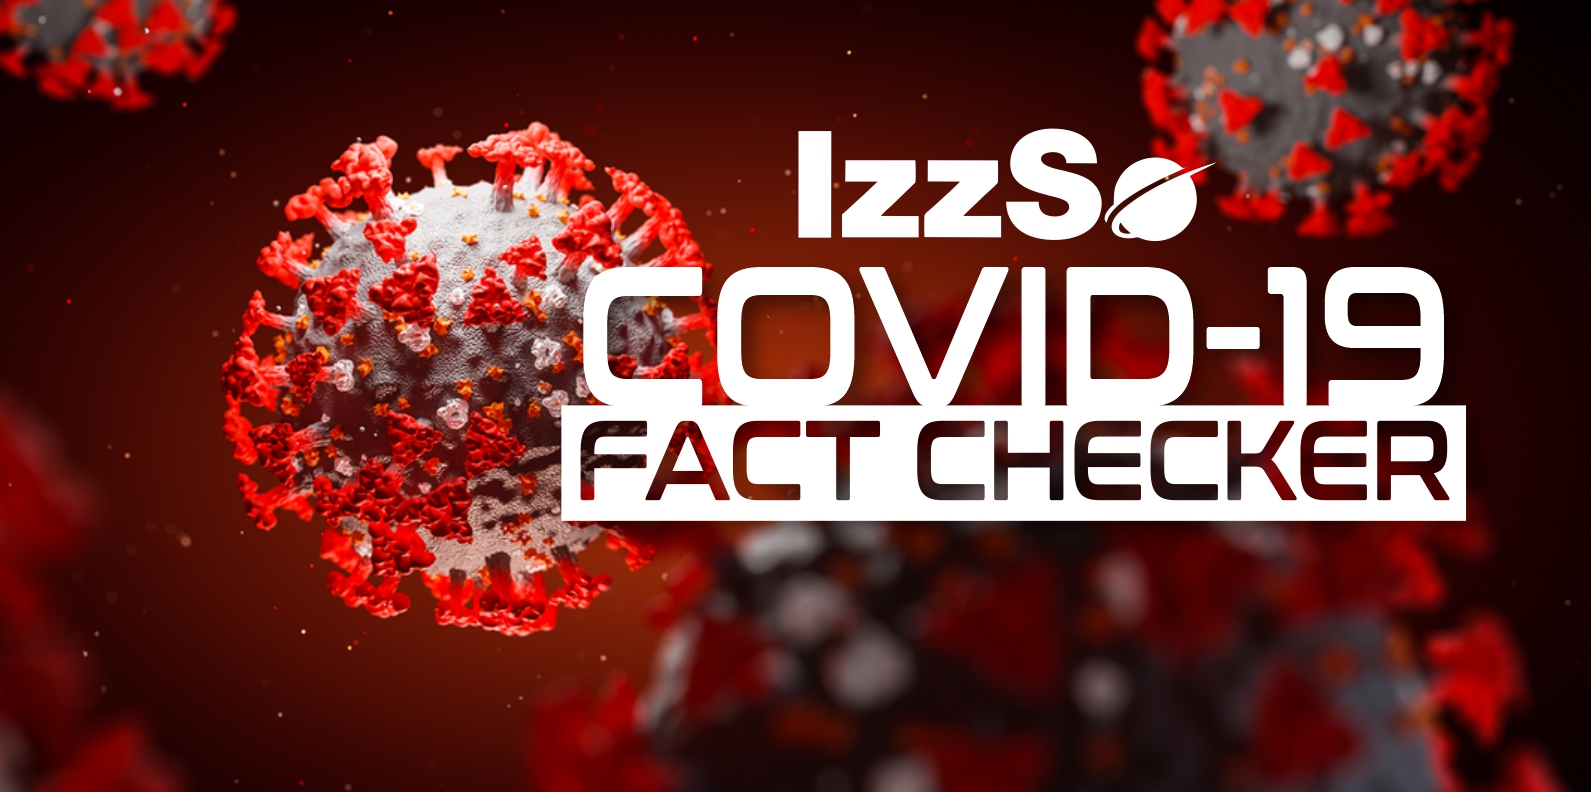 IzzSo Covid Fact checker-Spraying alcohol and chlorine on your body will NOT kill the virus that has already entered your body